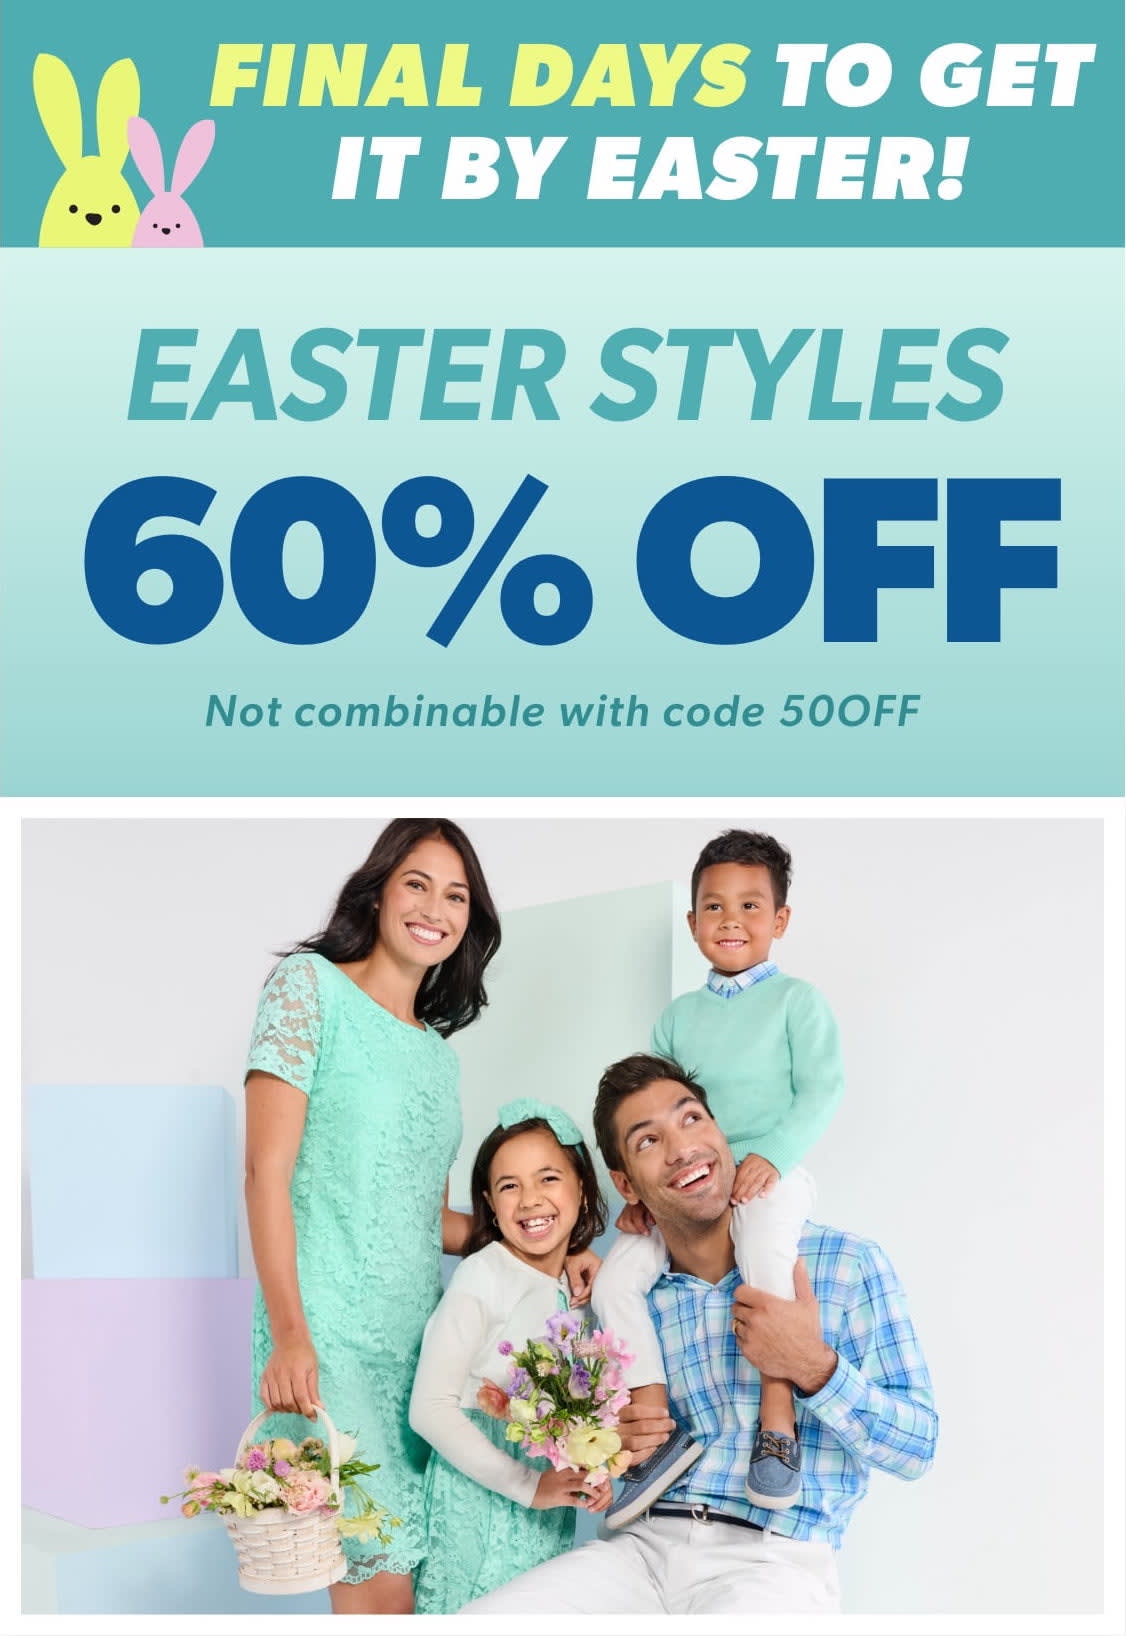 LIMITED TIME FLASH SALE! EASTER STYLES 60% OFF | not combinable with code 50OFF